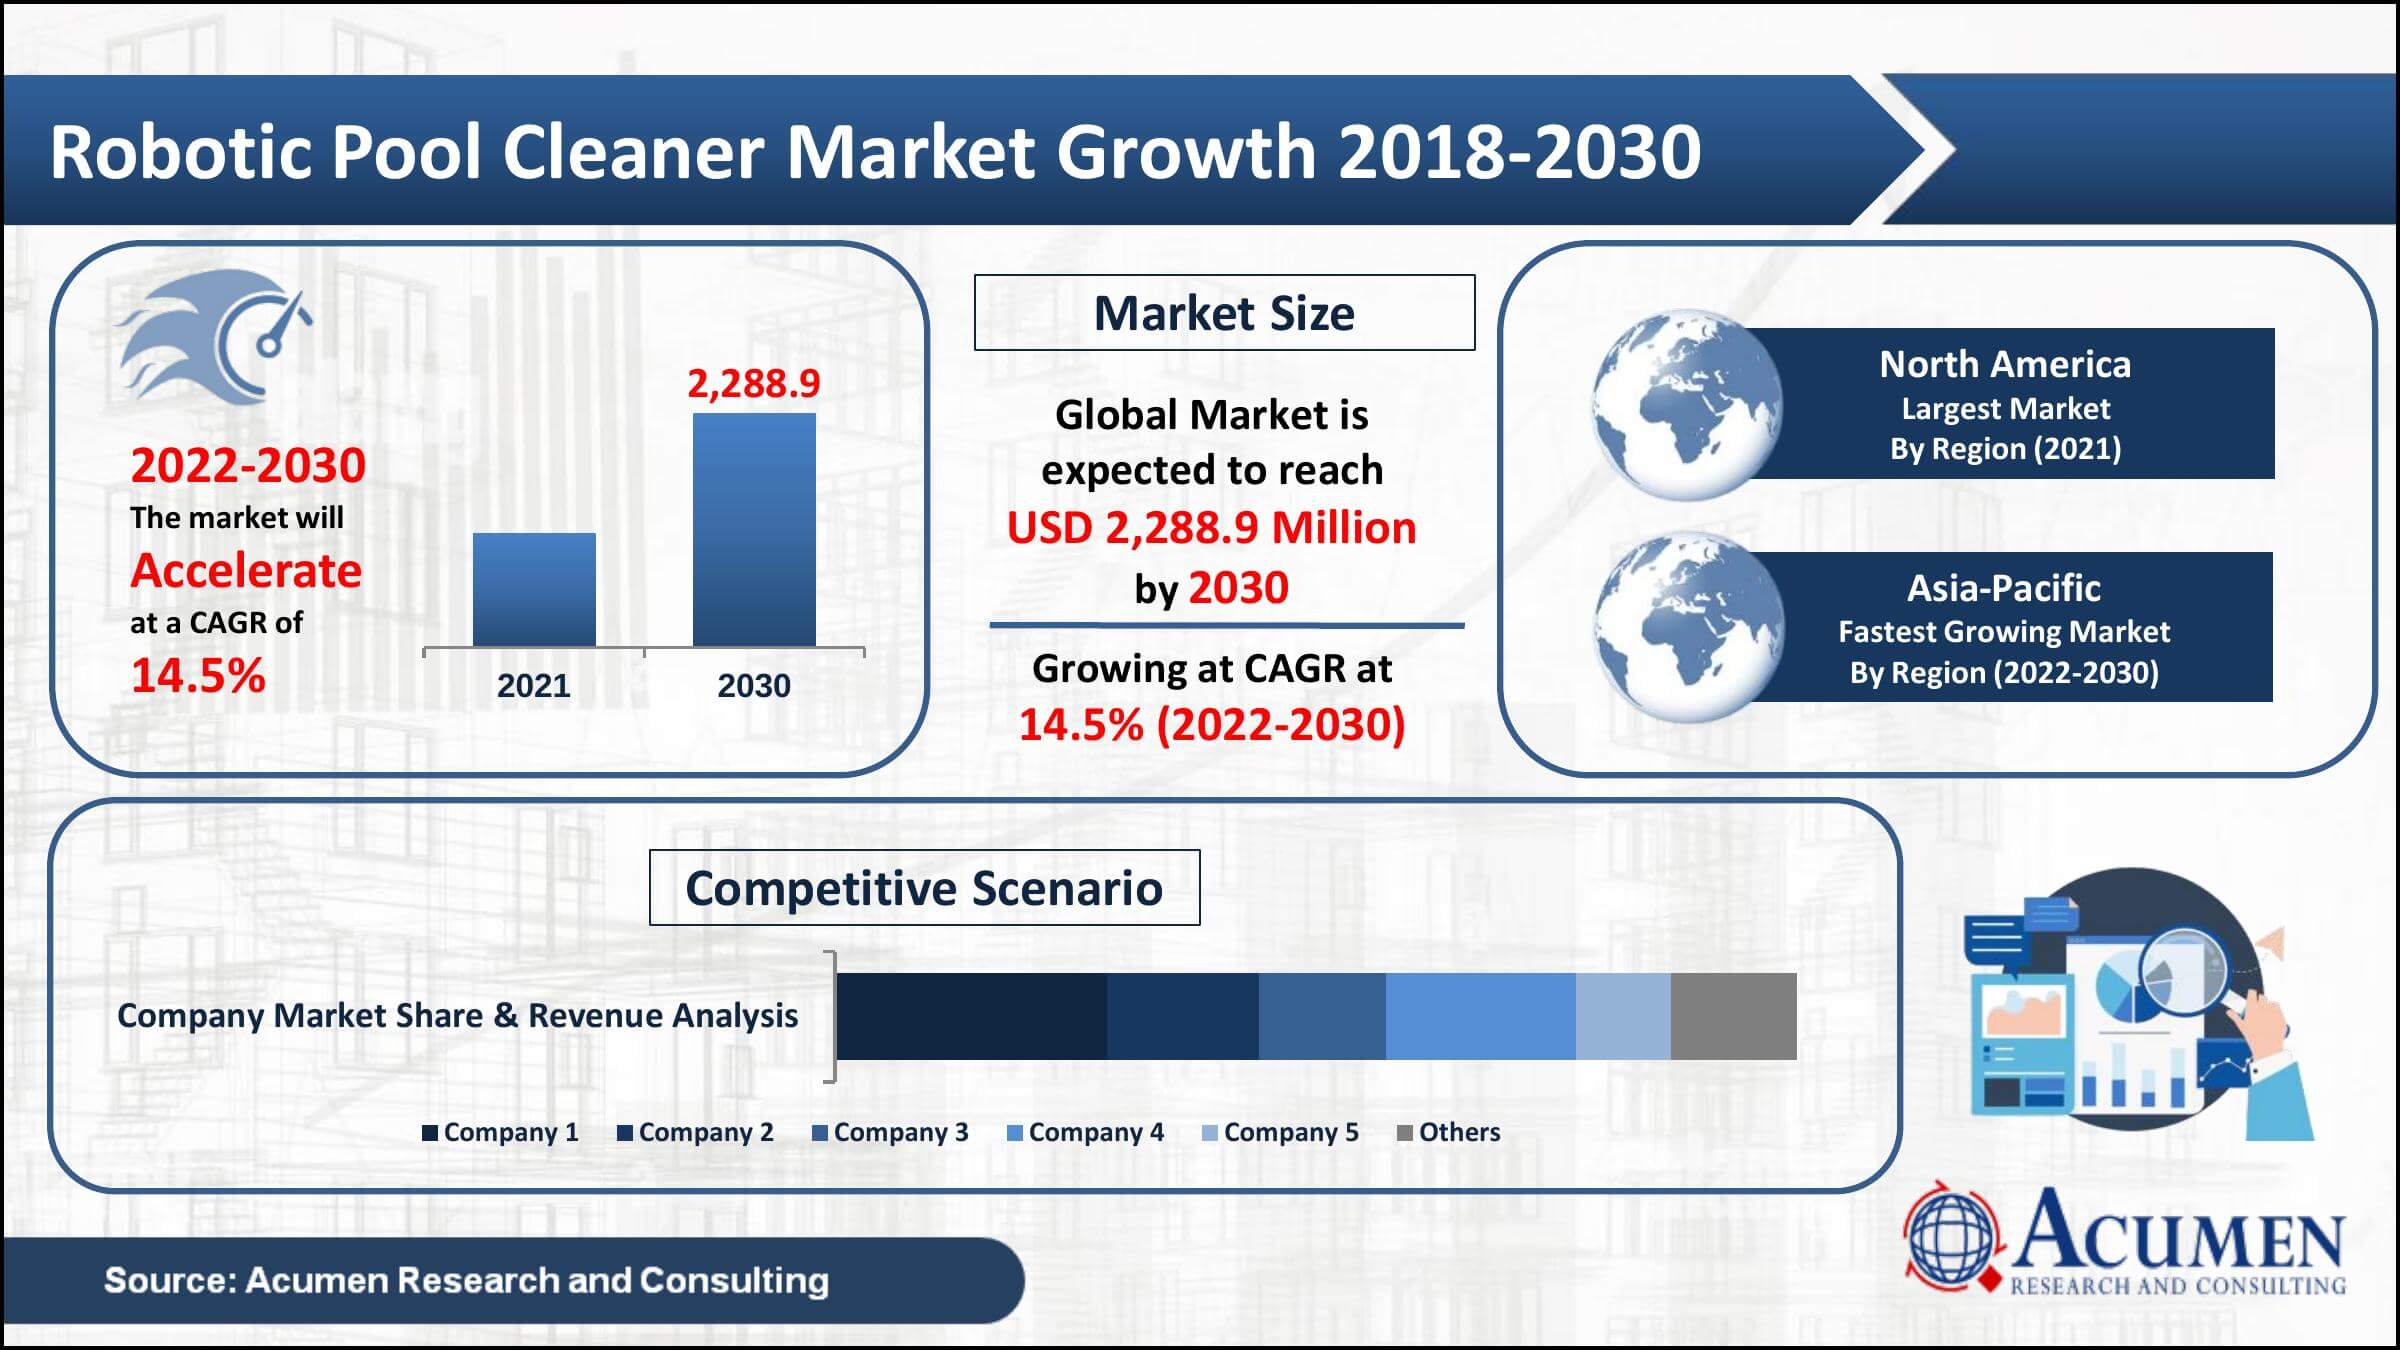 The global market for Robotic Pool Cleaner Market is expected to grow at a CAGR of around 14.5% between 2022 and 2030